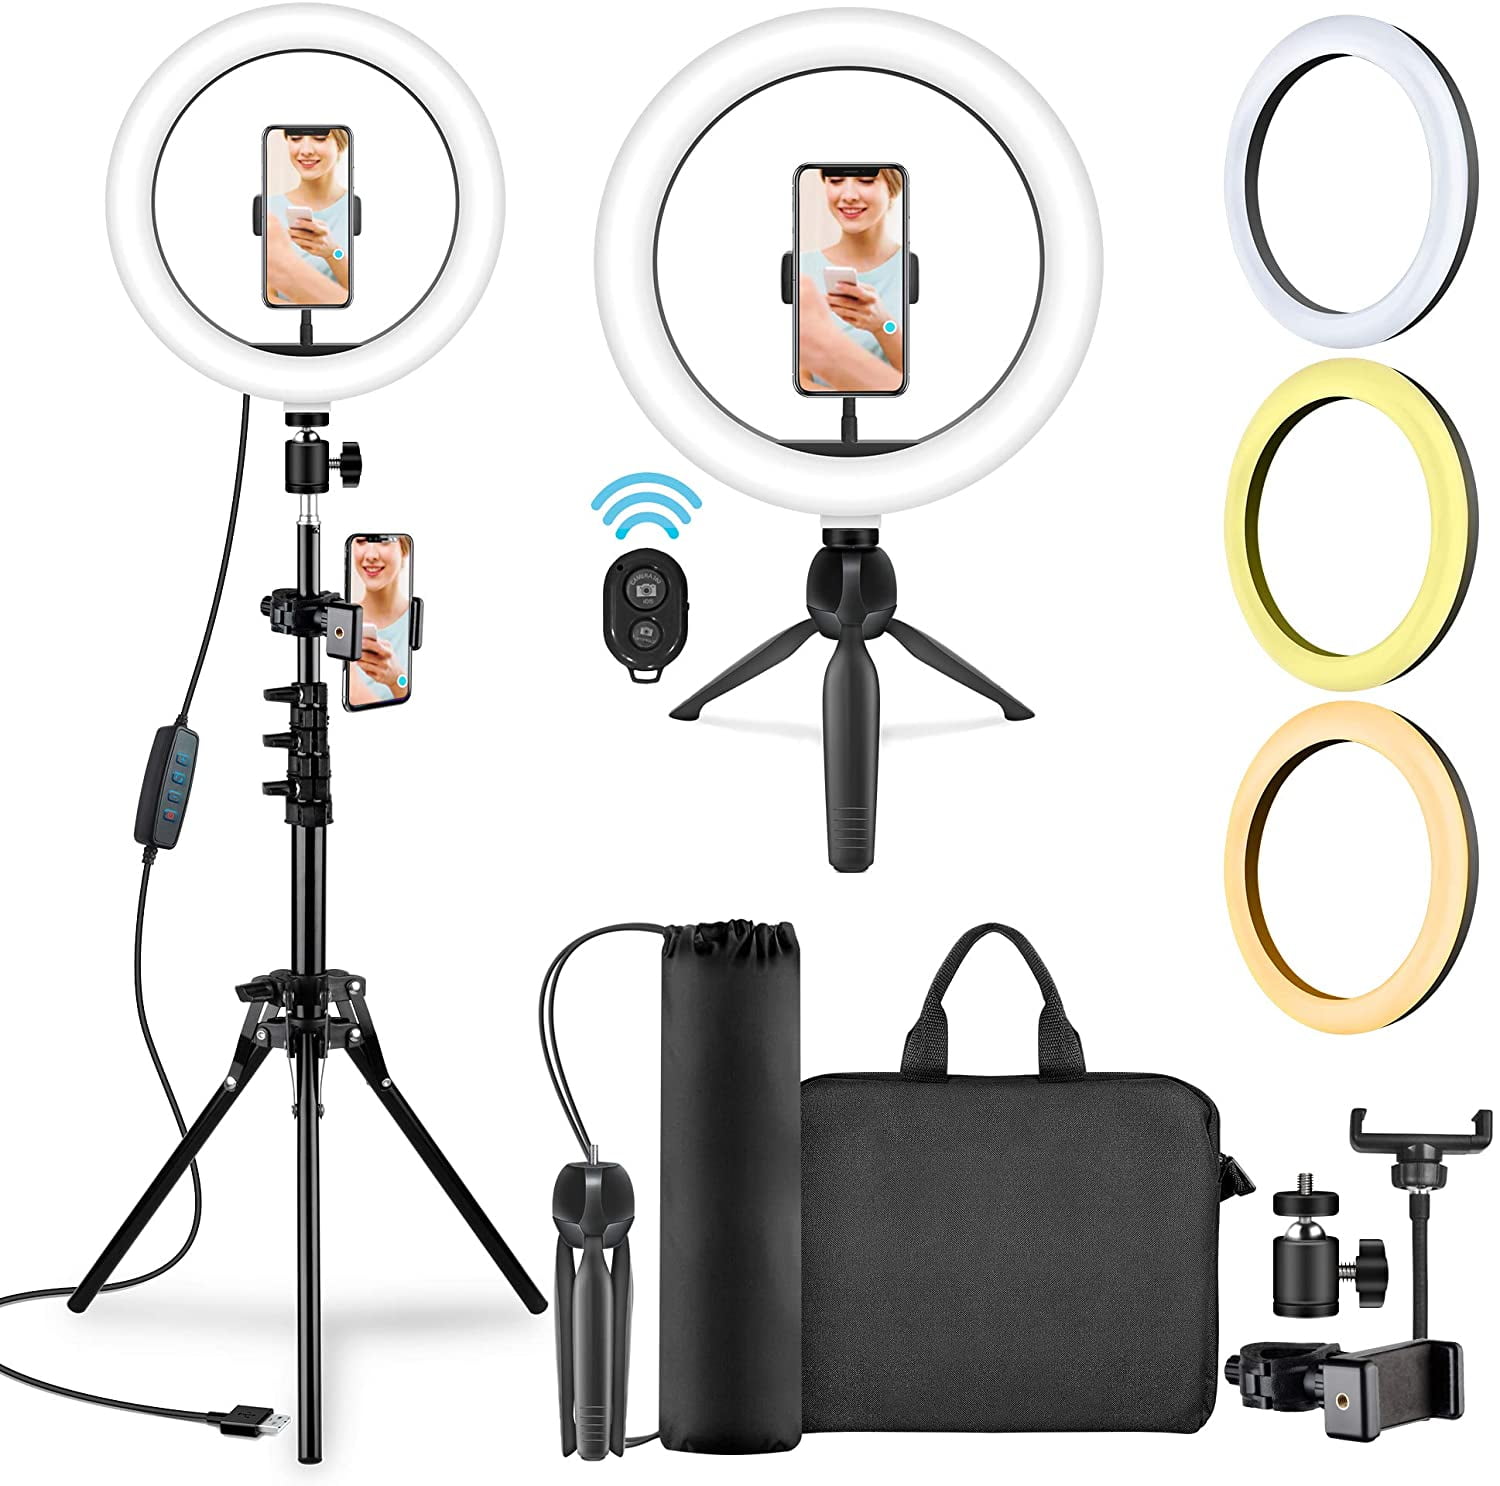 Live Streaming Photography Led Fill Light for Phone Selfie Ring Light with Stand 